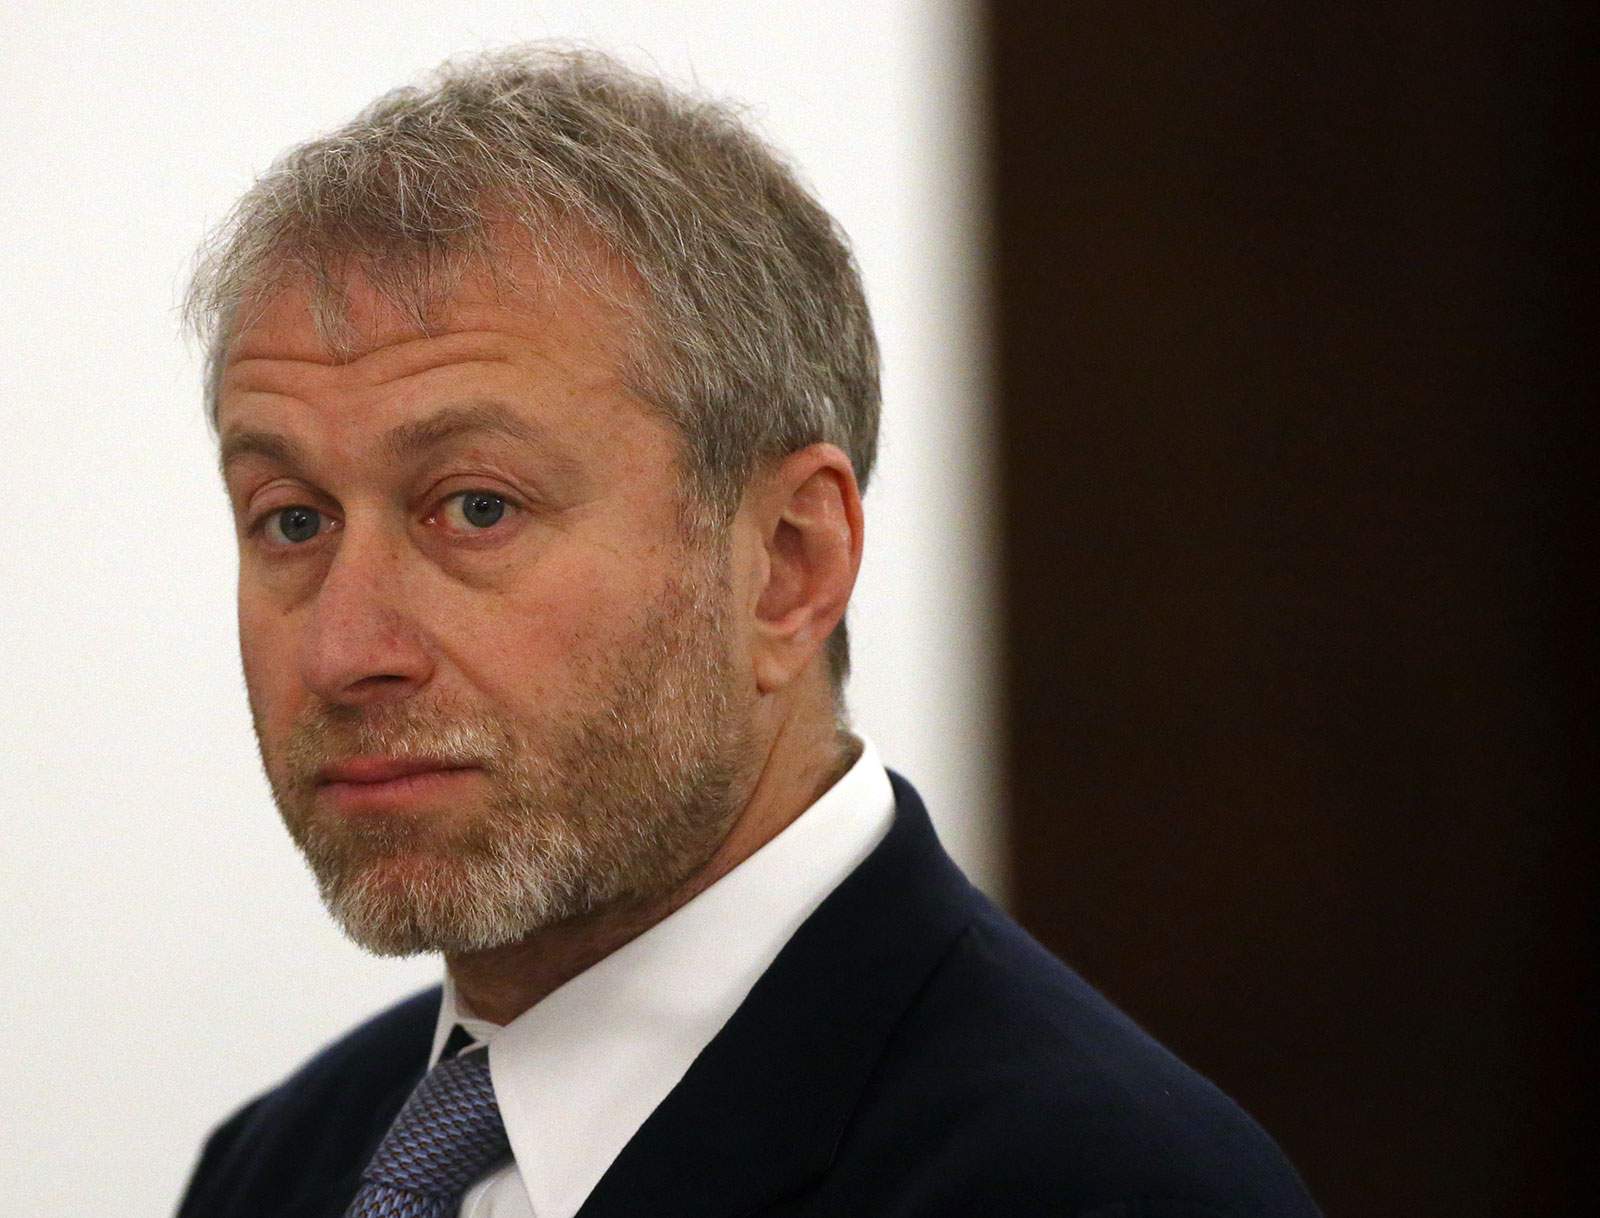 Russian billionaire Roman Abramovich attends a meeting in Moscow in 2016.